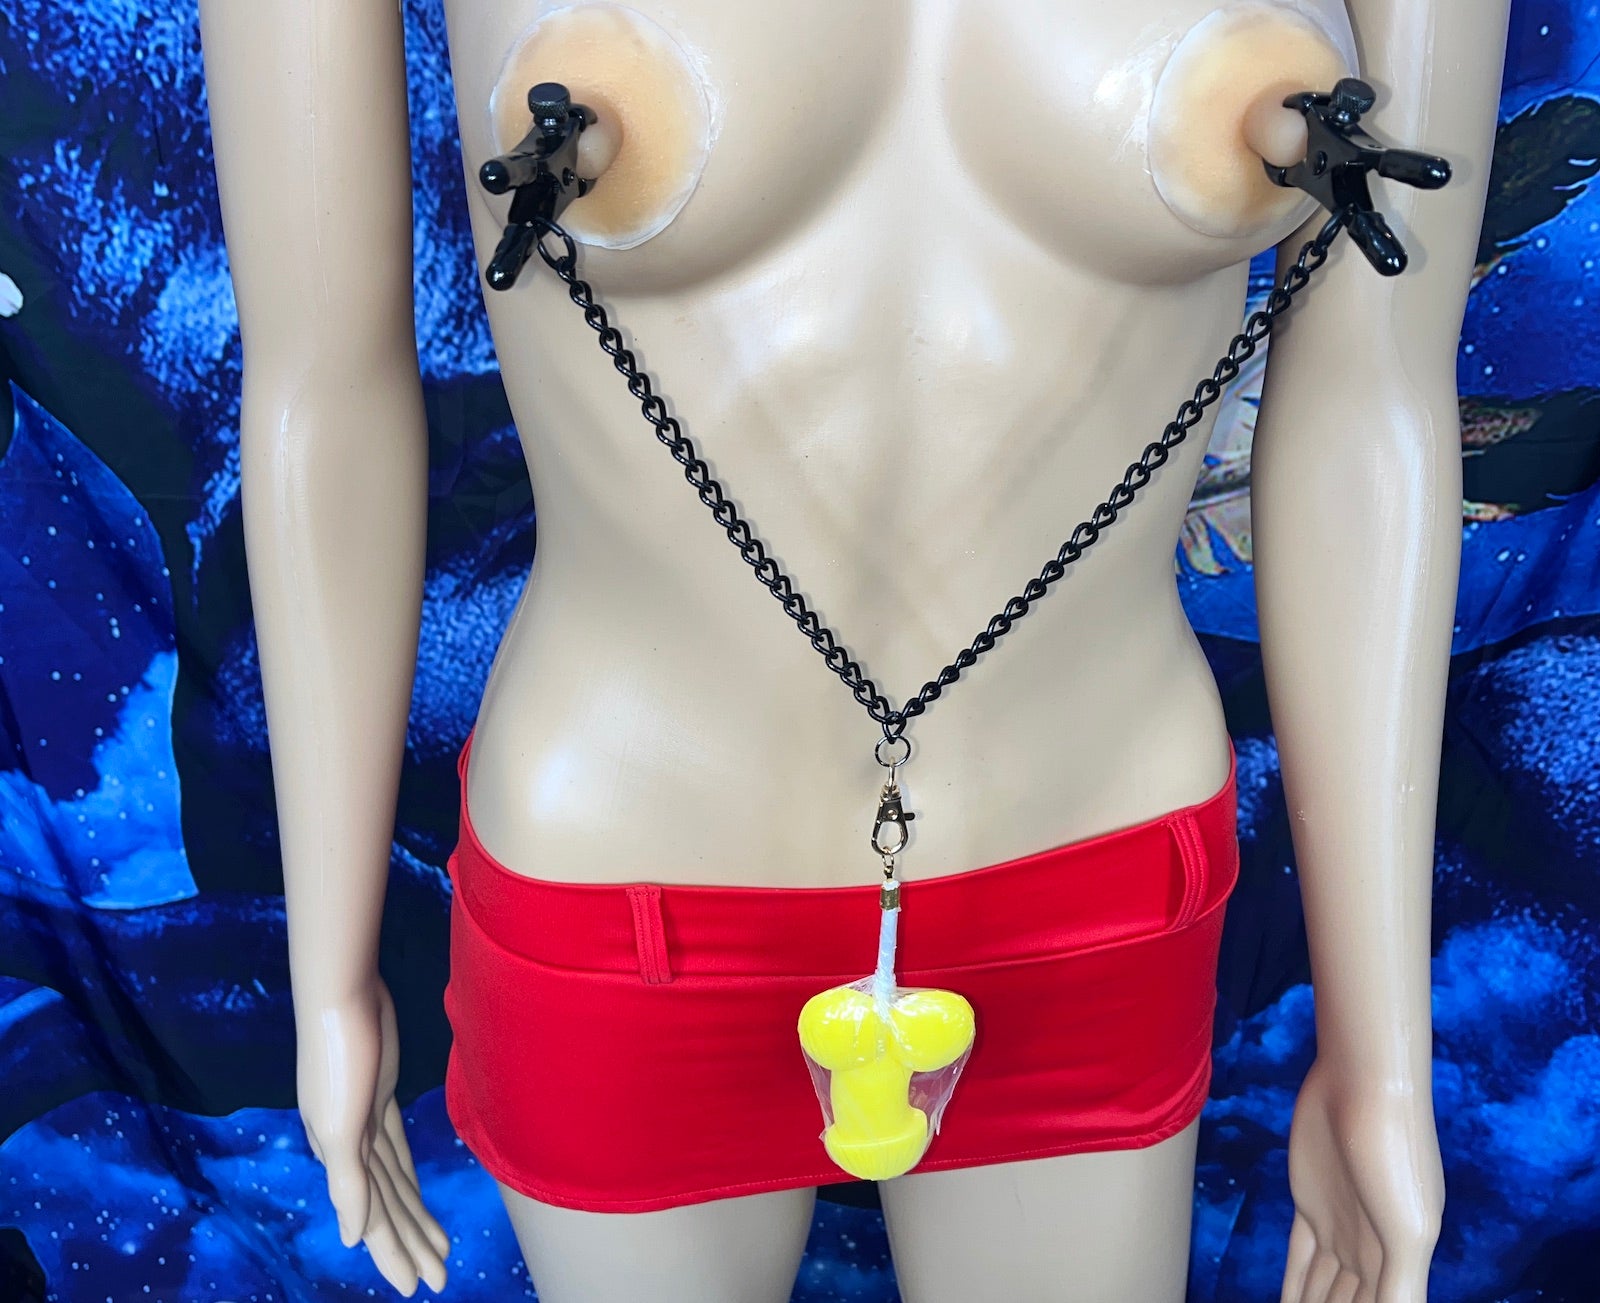 Bullnose Adjustable Nipple Clamps with a Pina Colada Cock Sucker